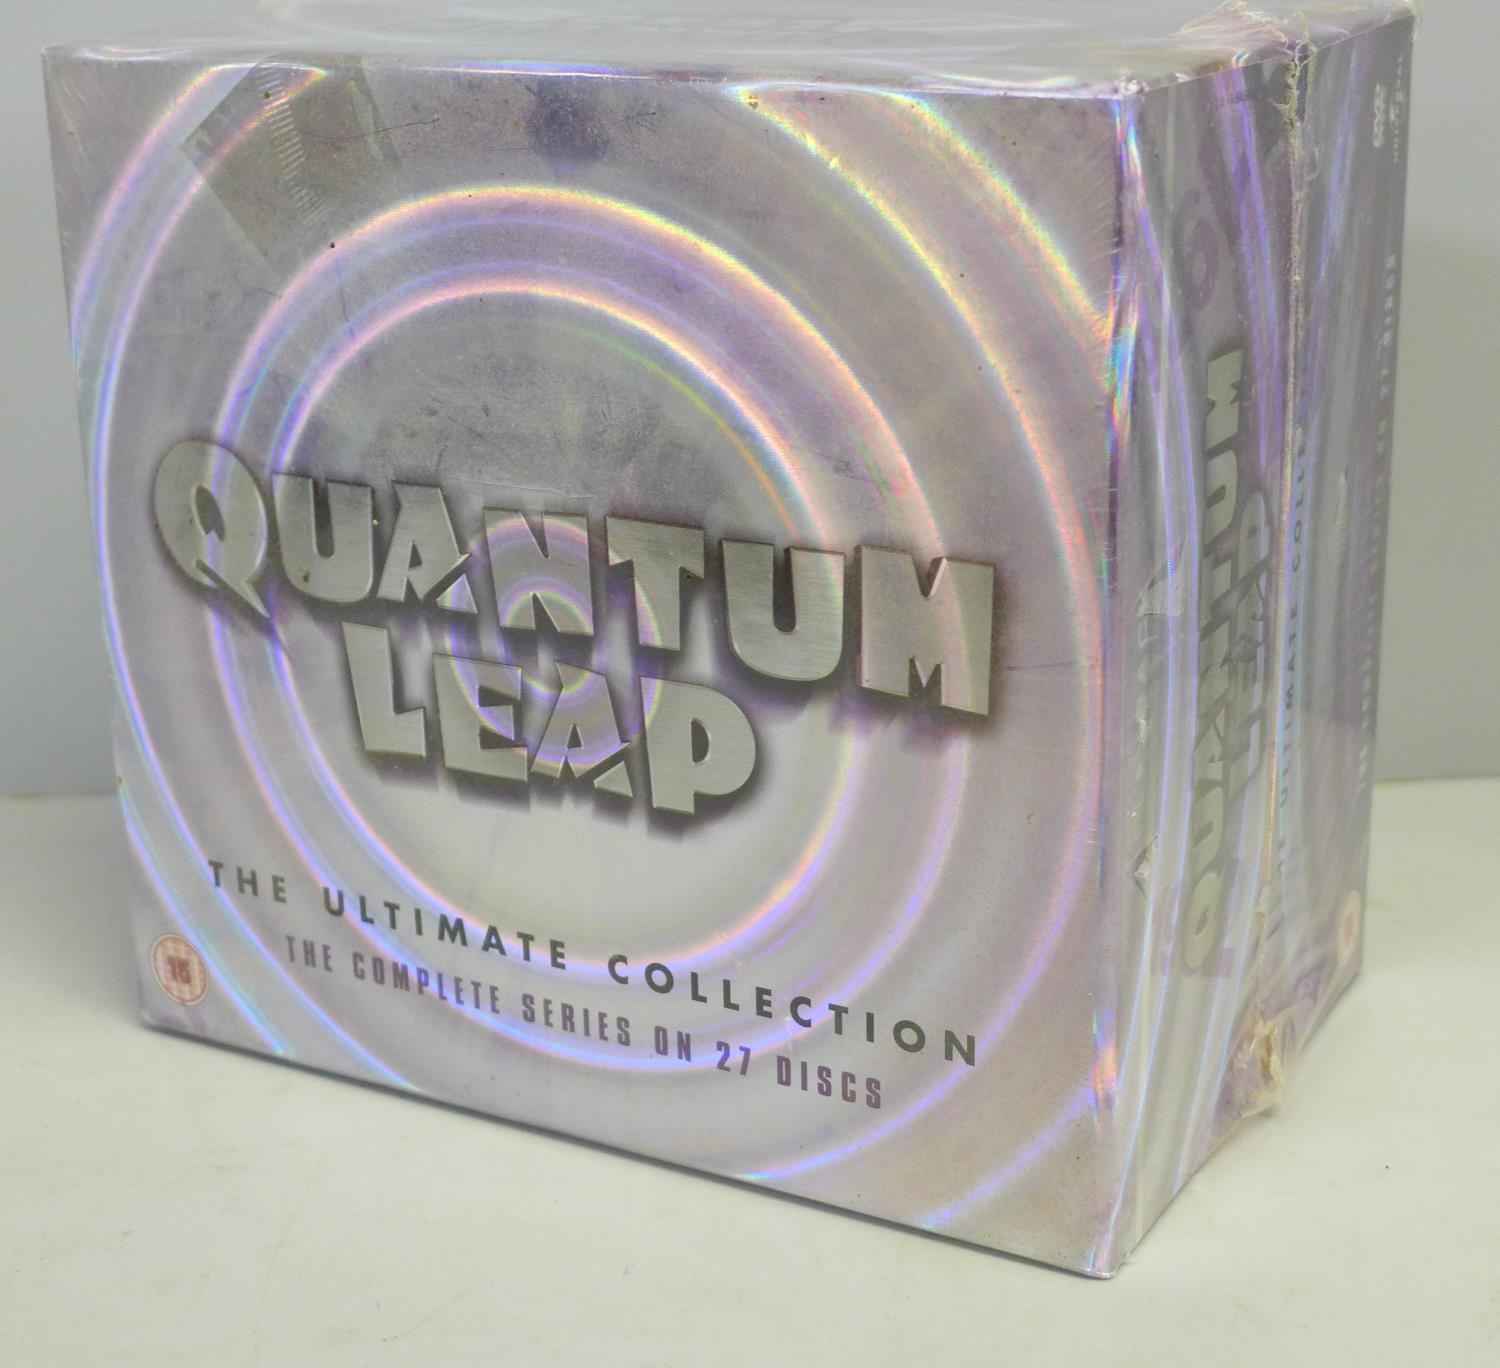 Quantum Leap; The Ultimate collection on 27 Discs